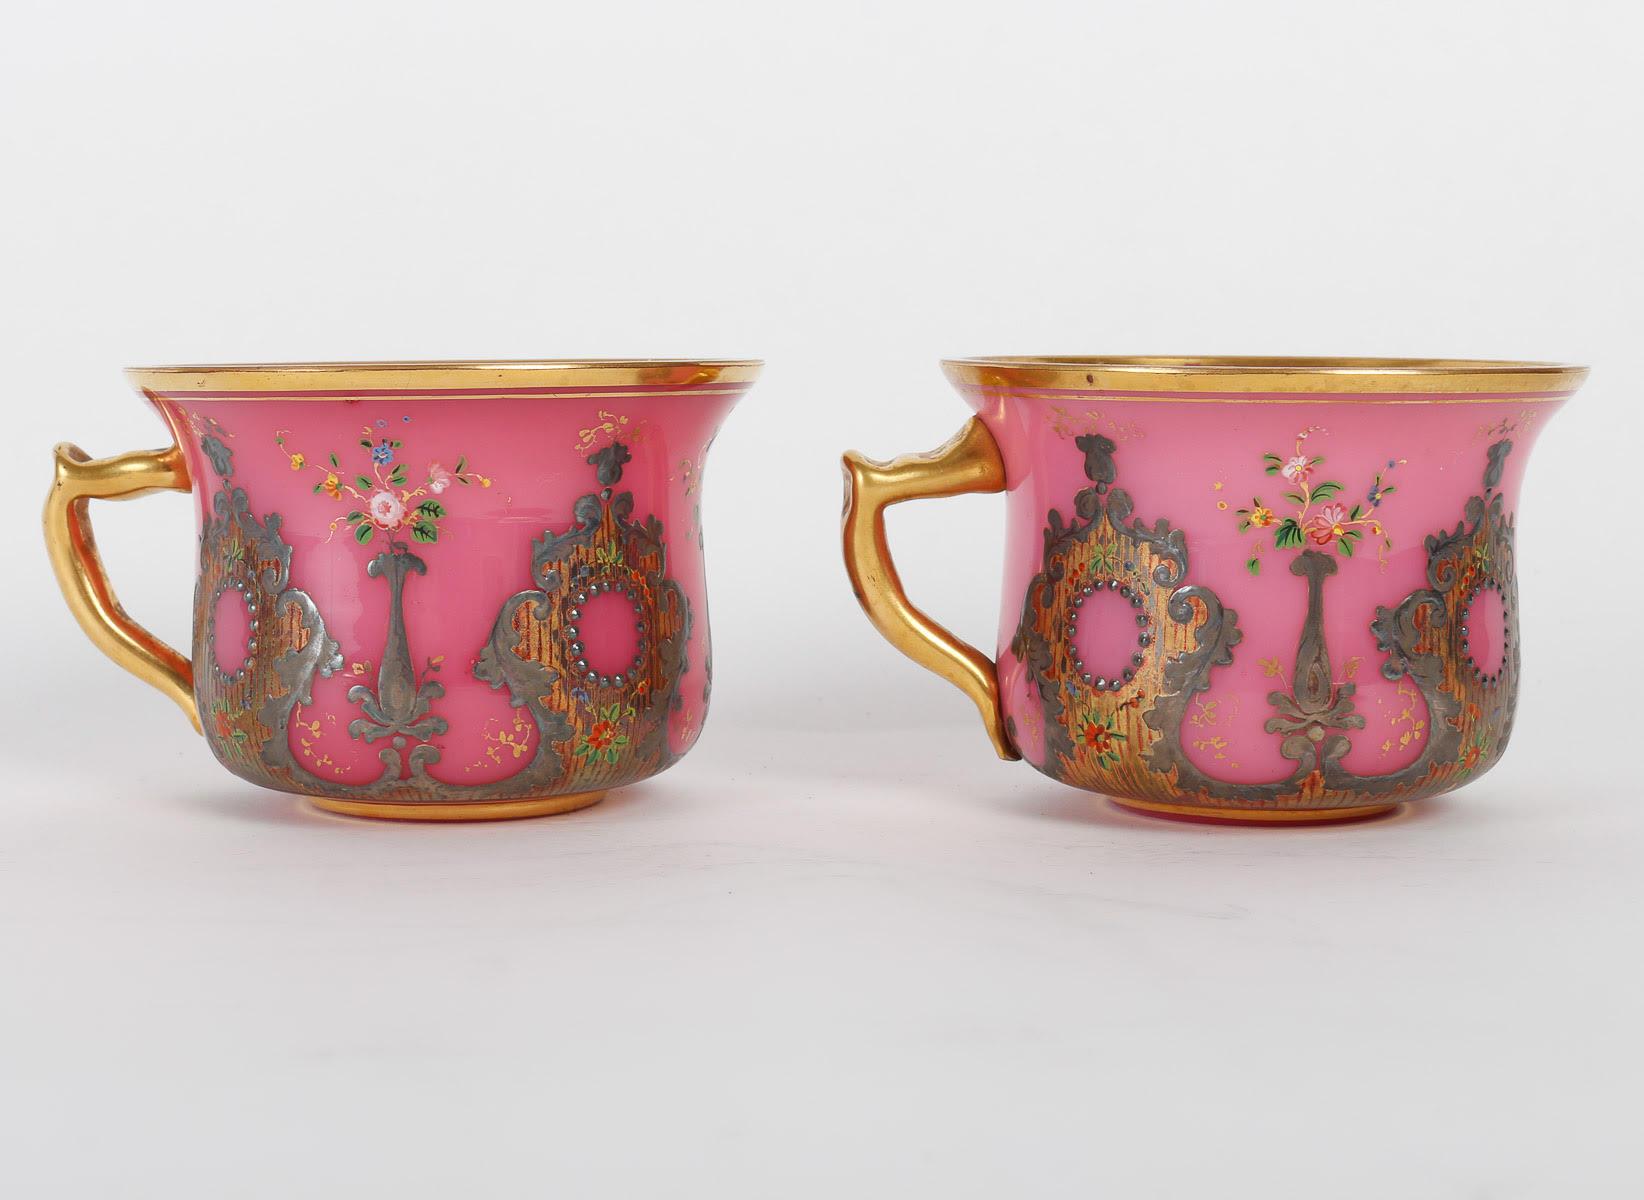 White and Pink Opaline Service Enamelled with Silver and Gold, 19th Century. 13